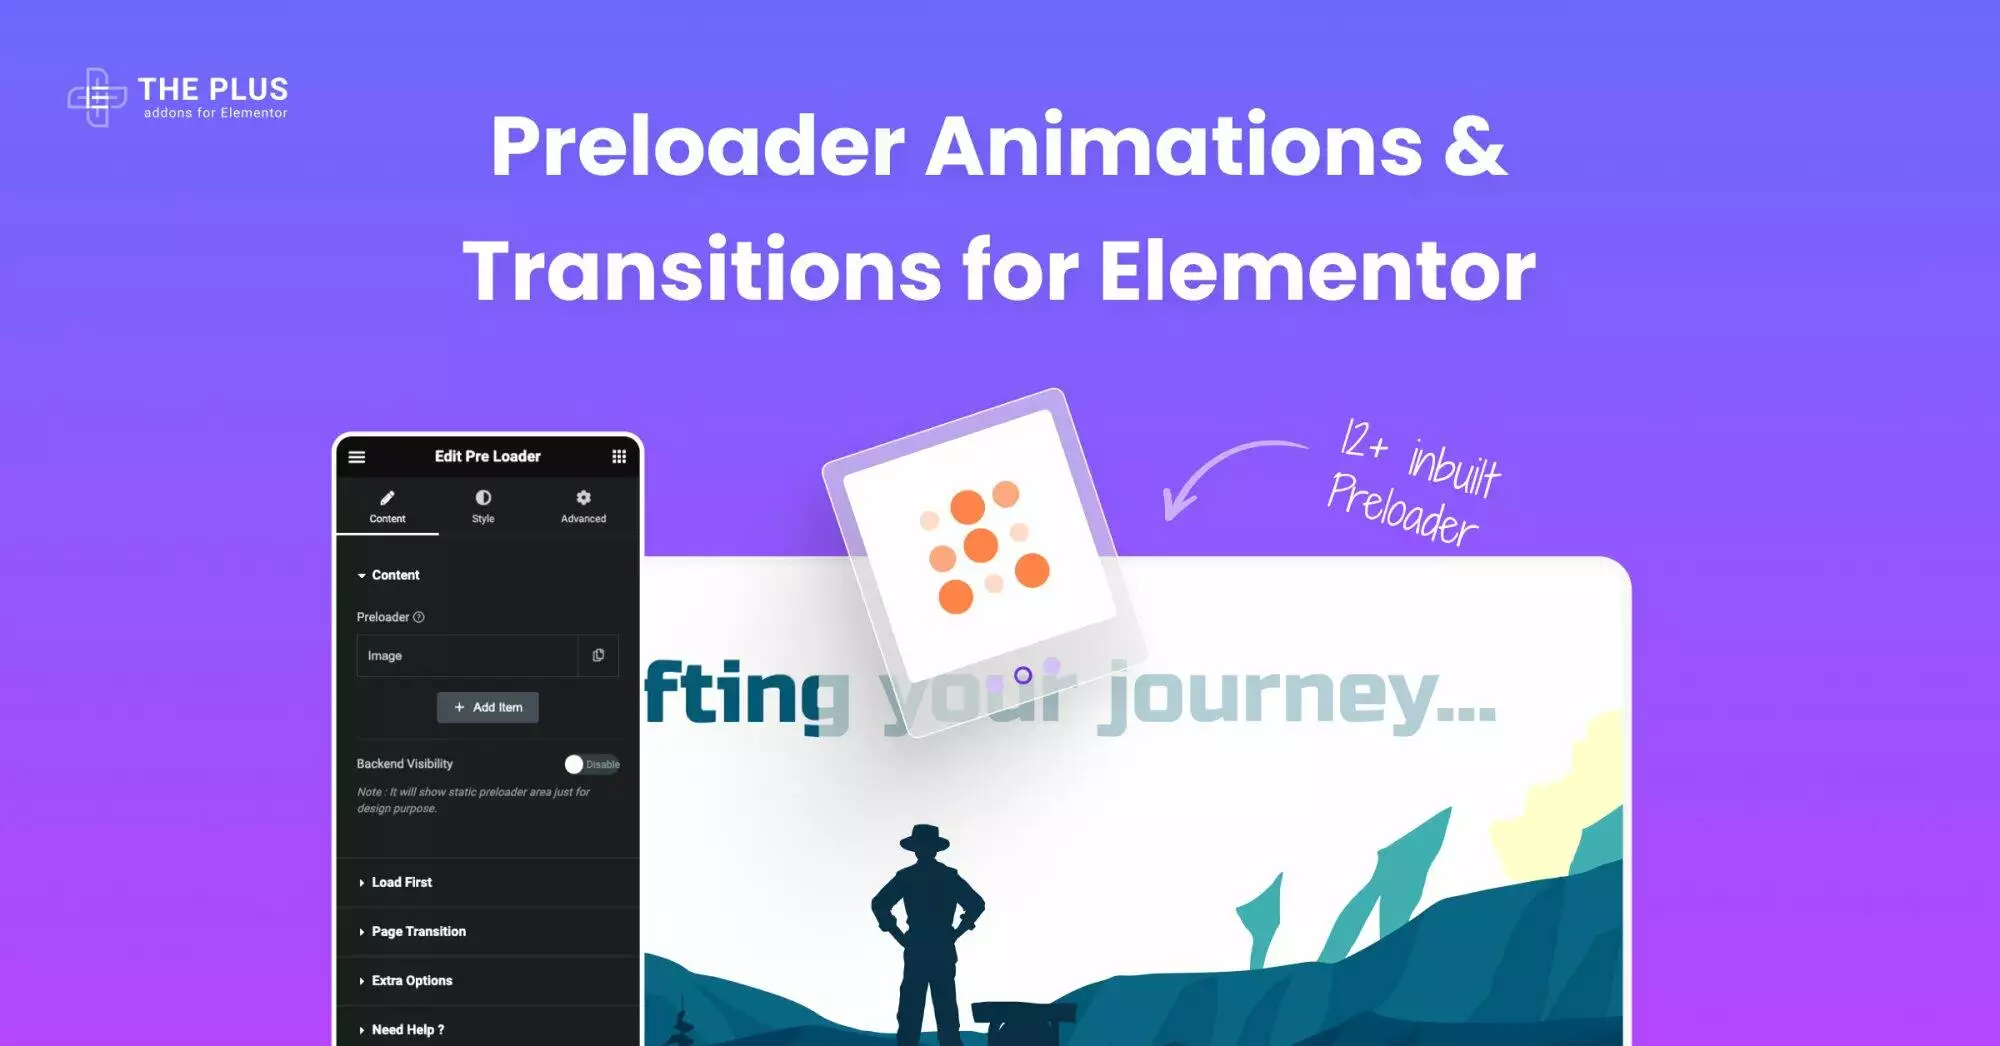 Preloader animations and transitions for elementor elementor preloader animations & transitions | the plus addons for elementor from the plus addons for elementor